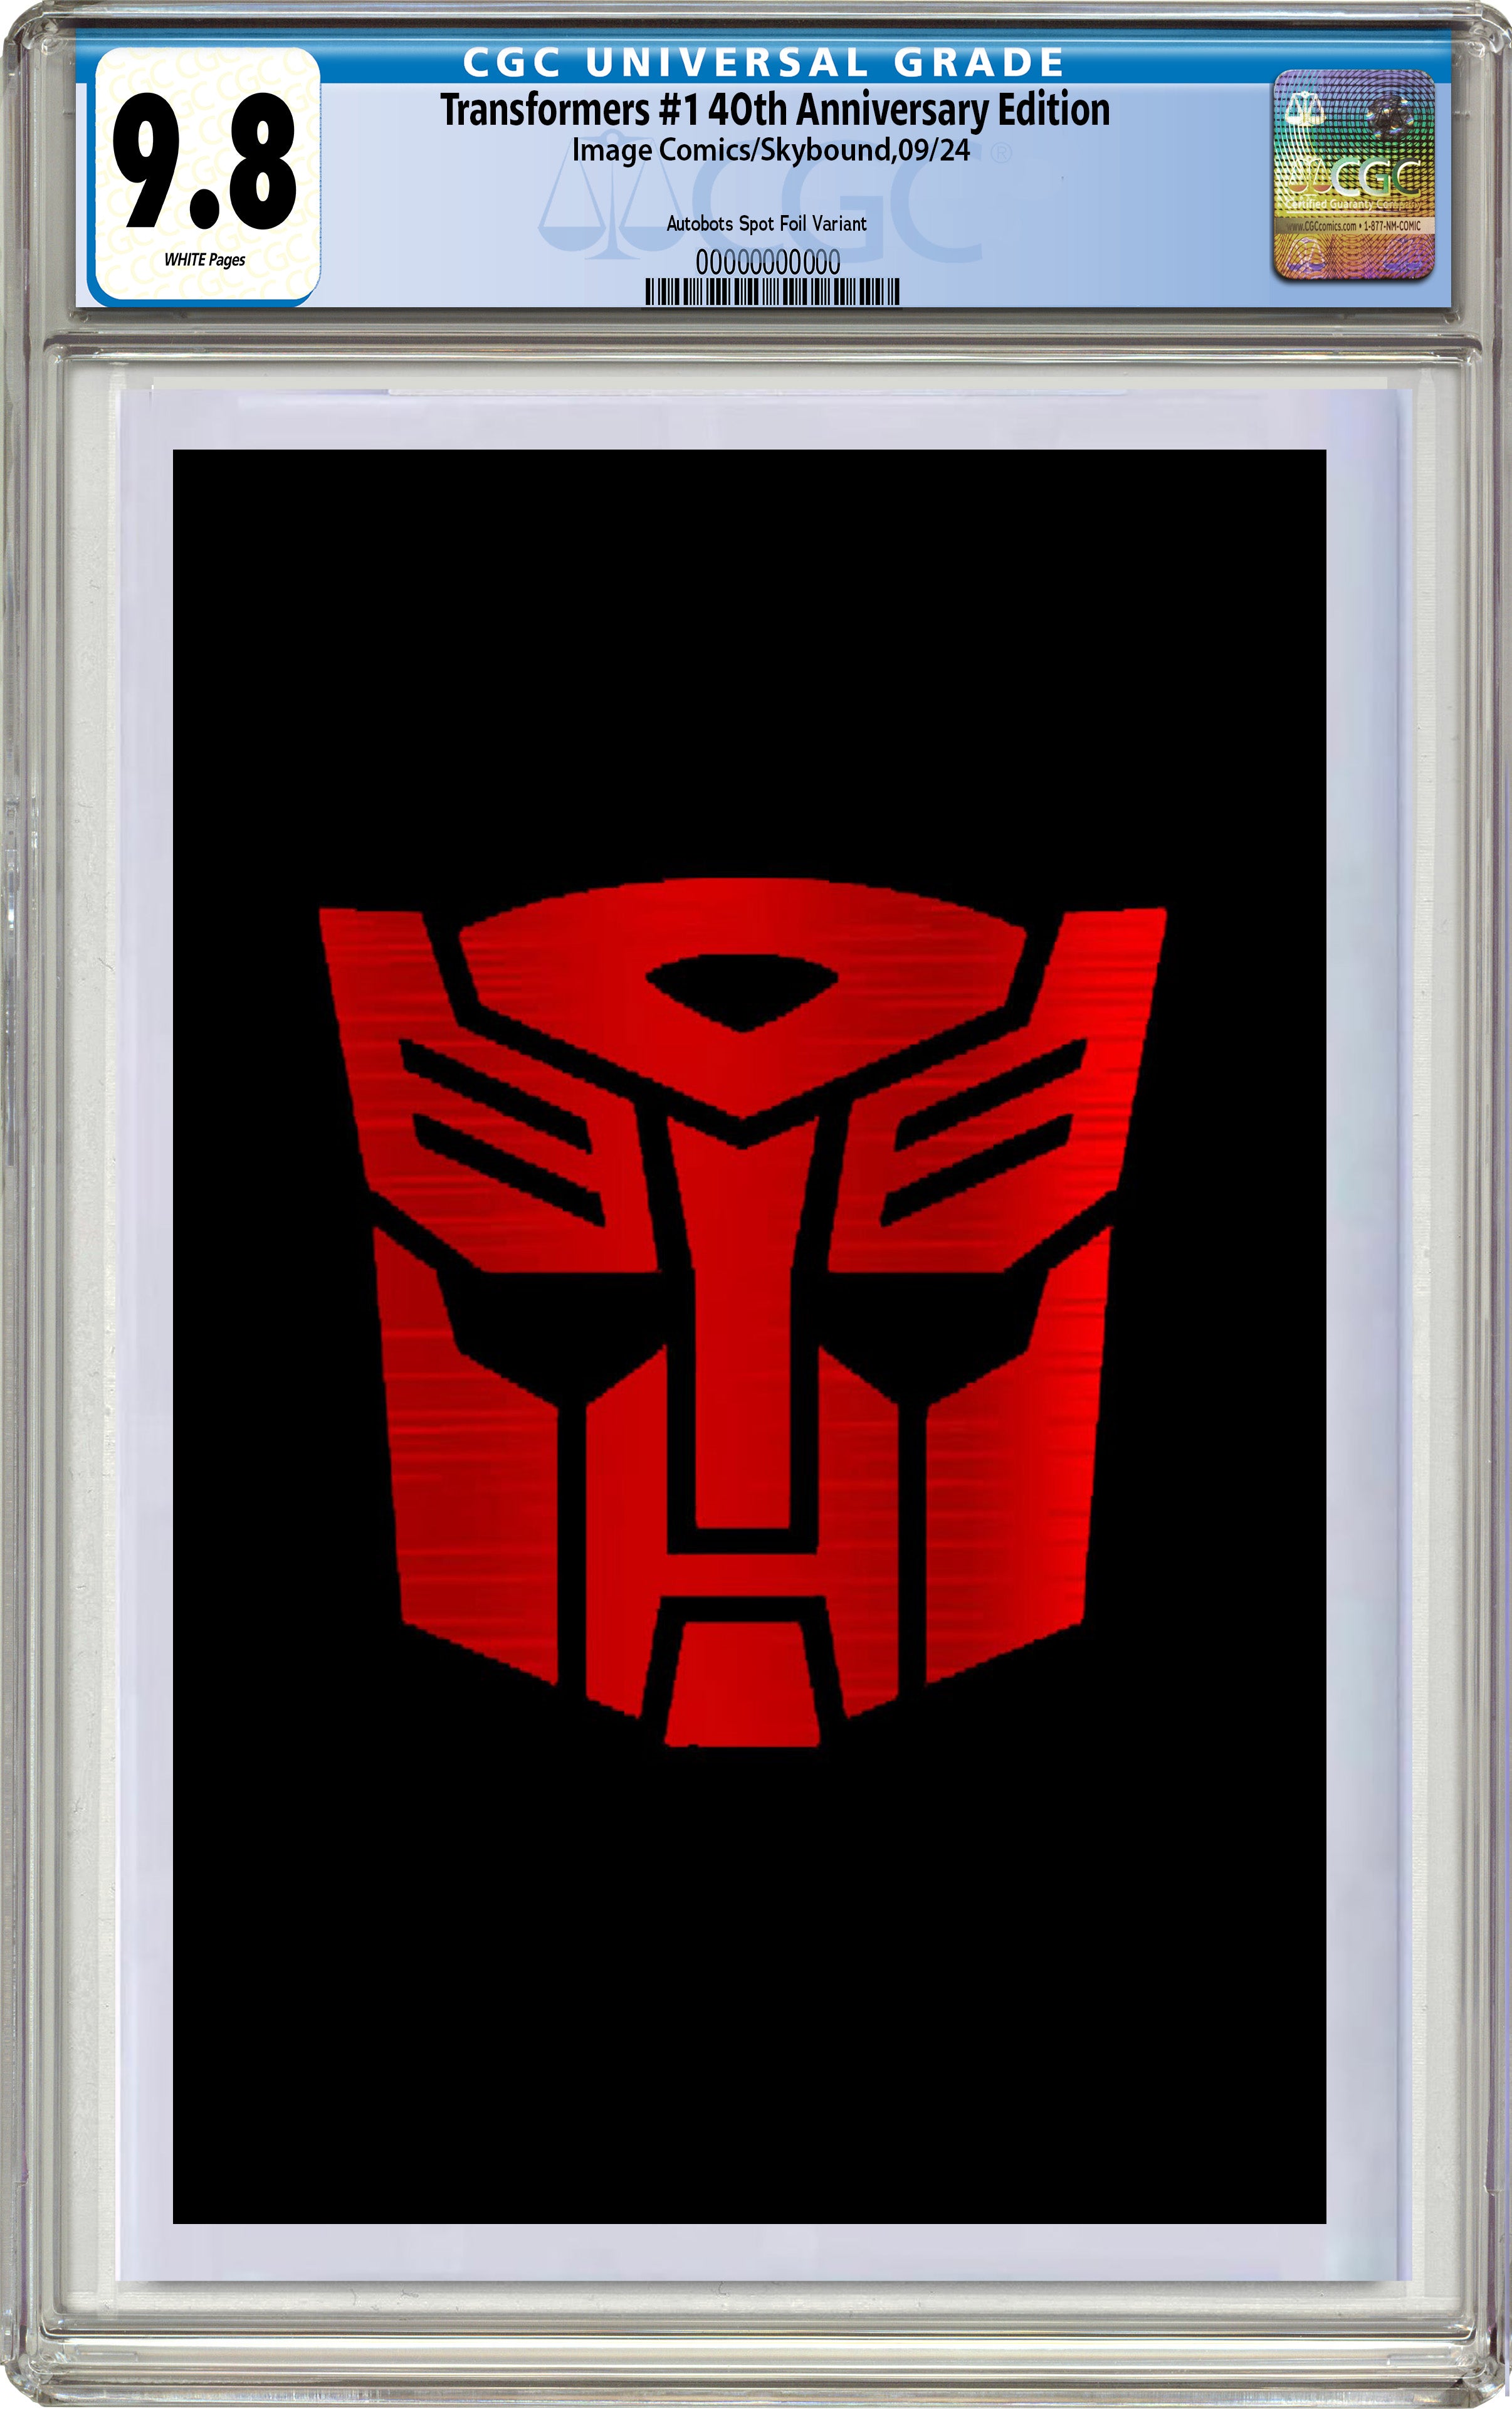 TRANSFORMERS #1 40TH ANNIVERSARY EDITION EXCLUSIVE FOIL VARIANTS 08-28-24